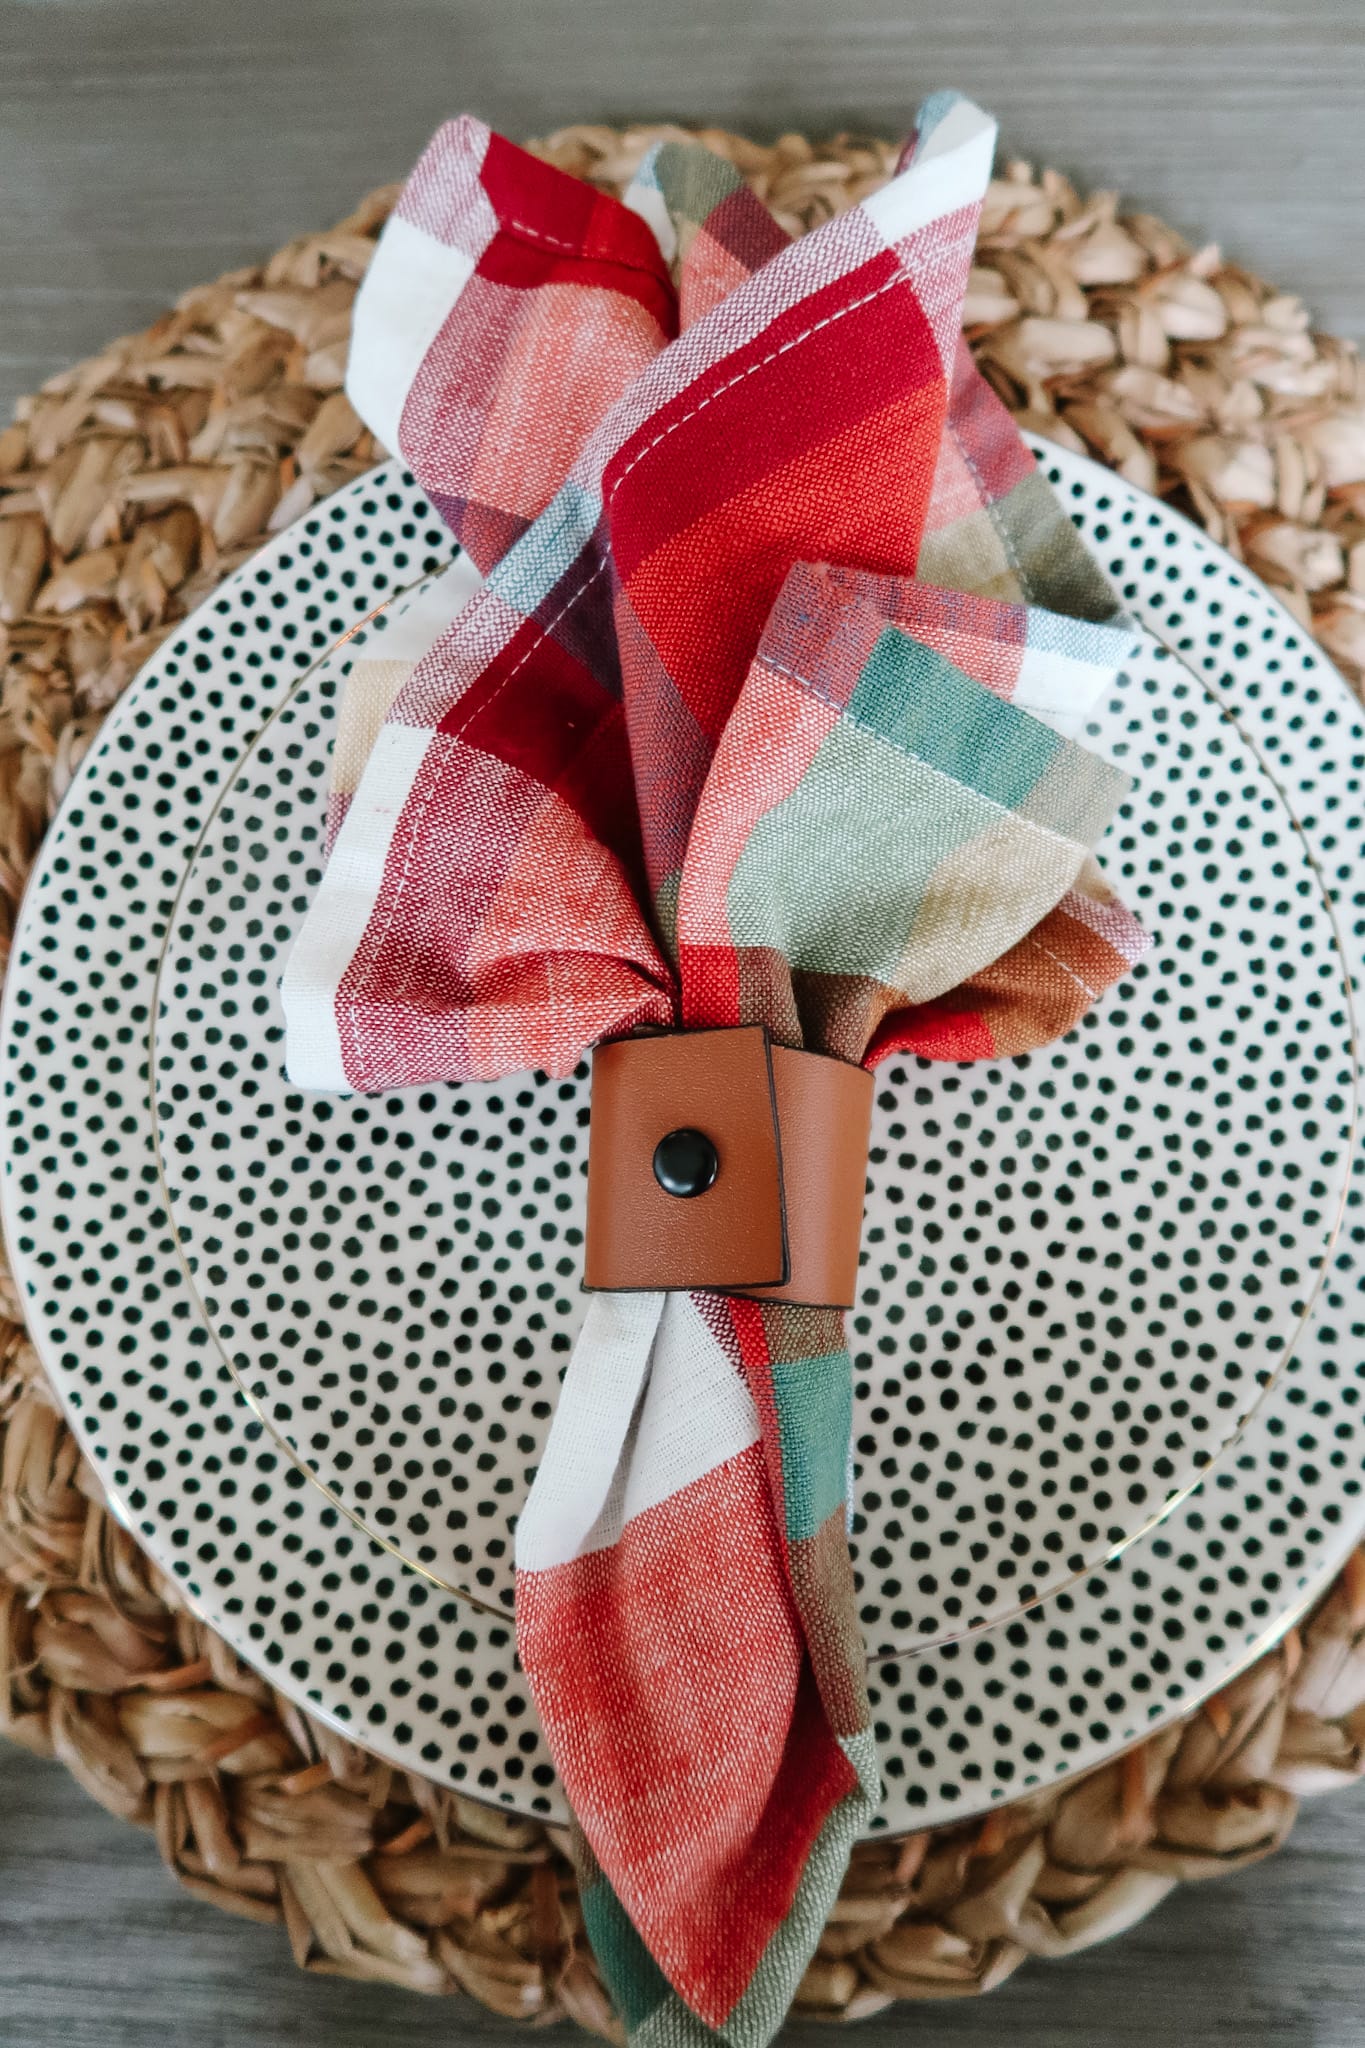 Fall Decor, Dotted Plates, Hyacinth Charger, Plaid Napkins, Leather Napkin Ring 